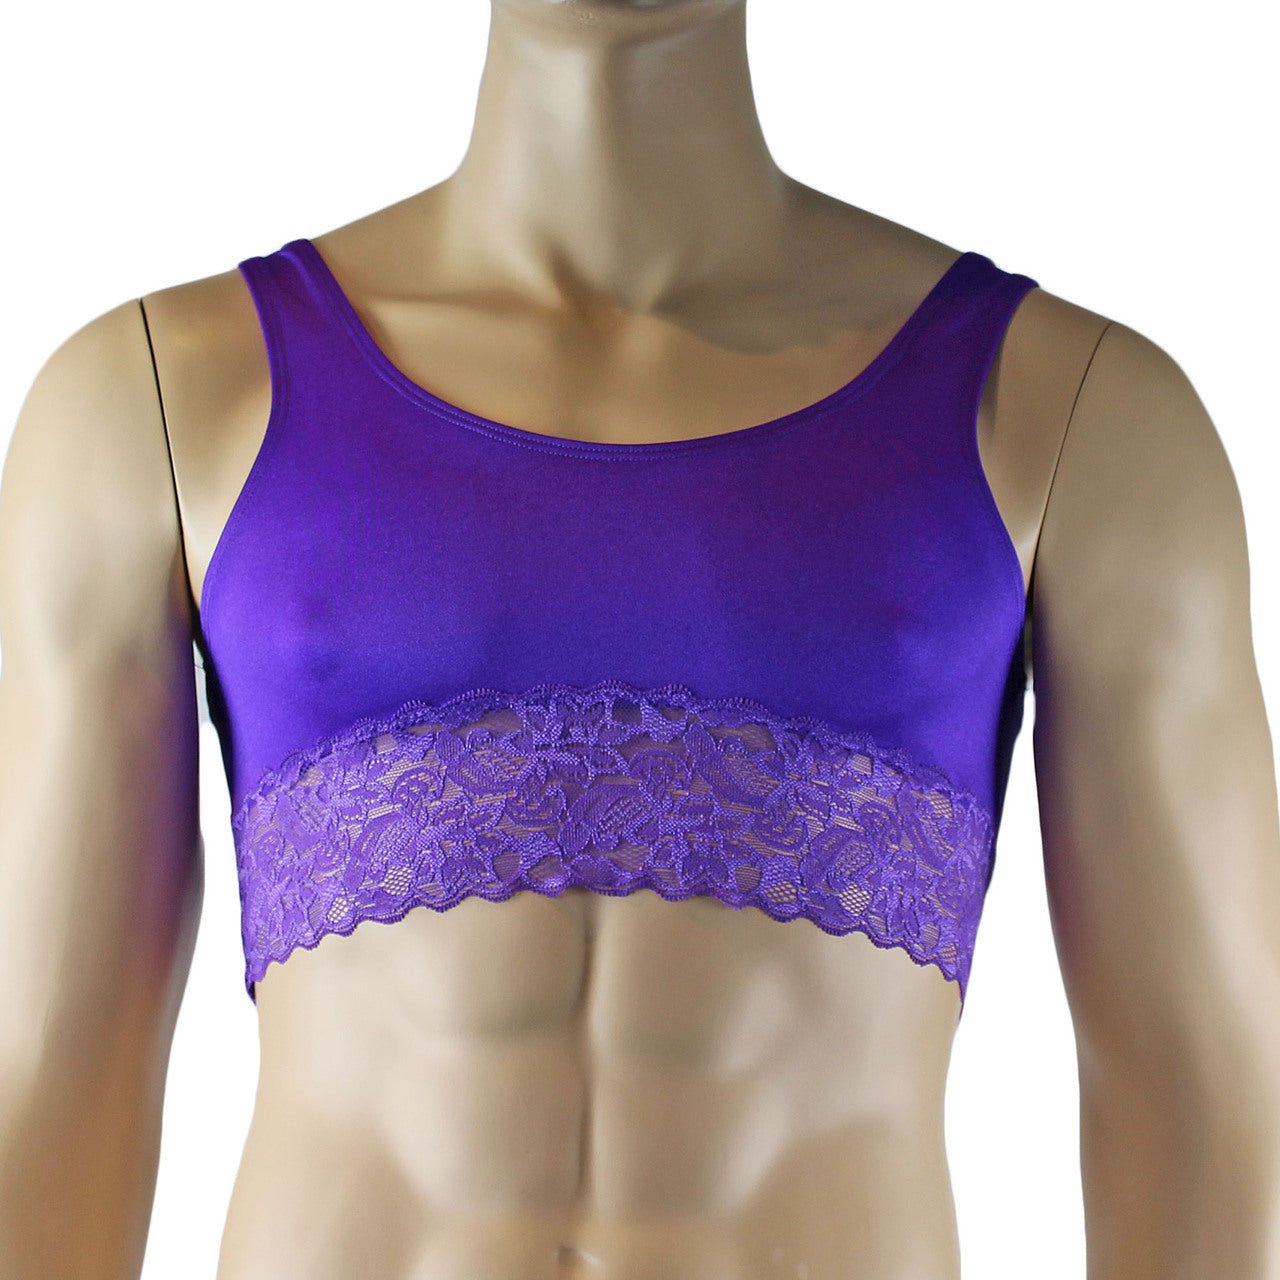 Male Penny Lingerie Bra Camisole Top with Lace Purple